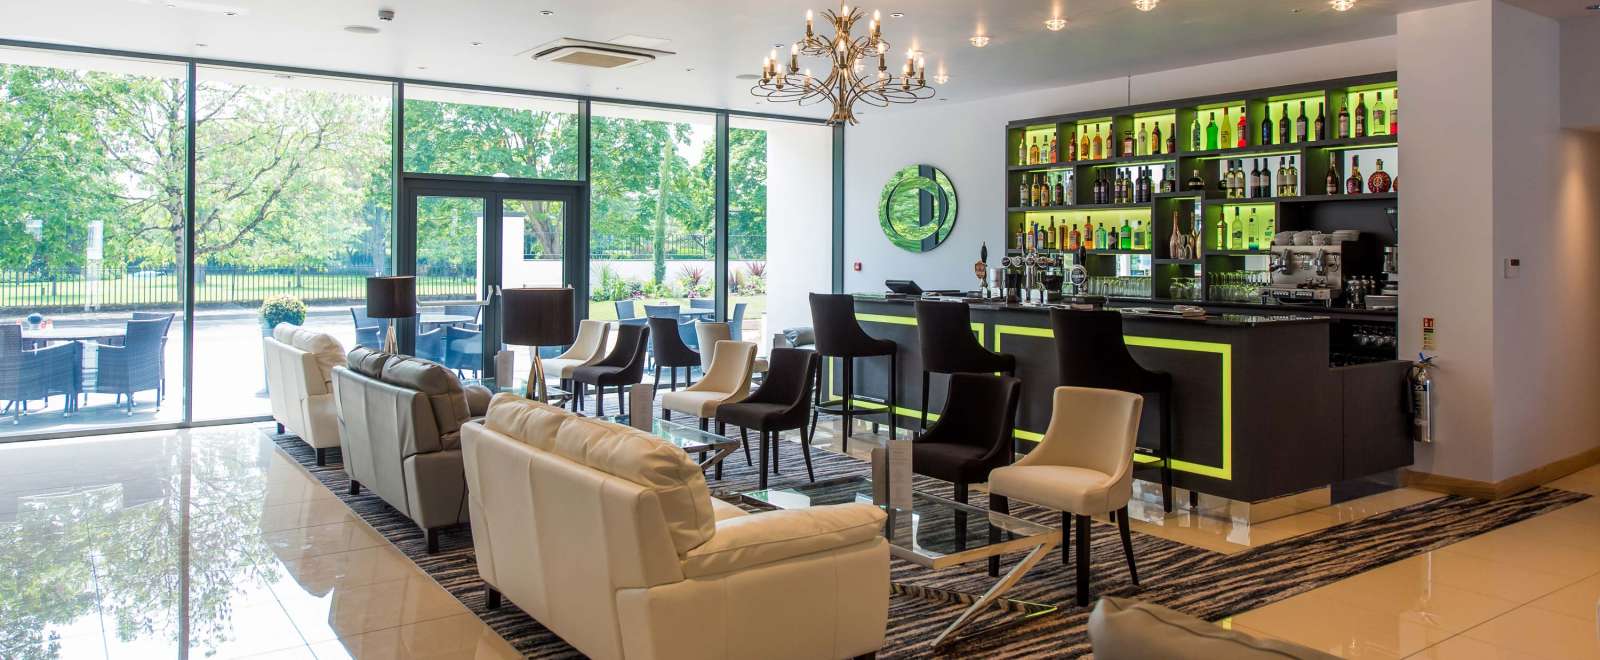 Park Hotel Foyer and Bar Seating Area with View over Rock Park